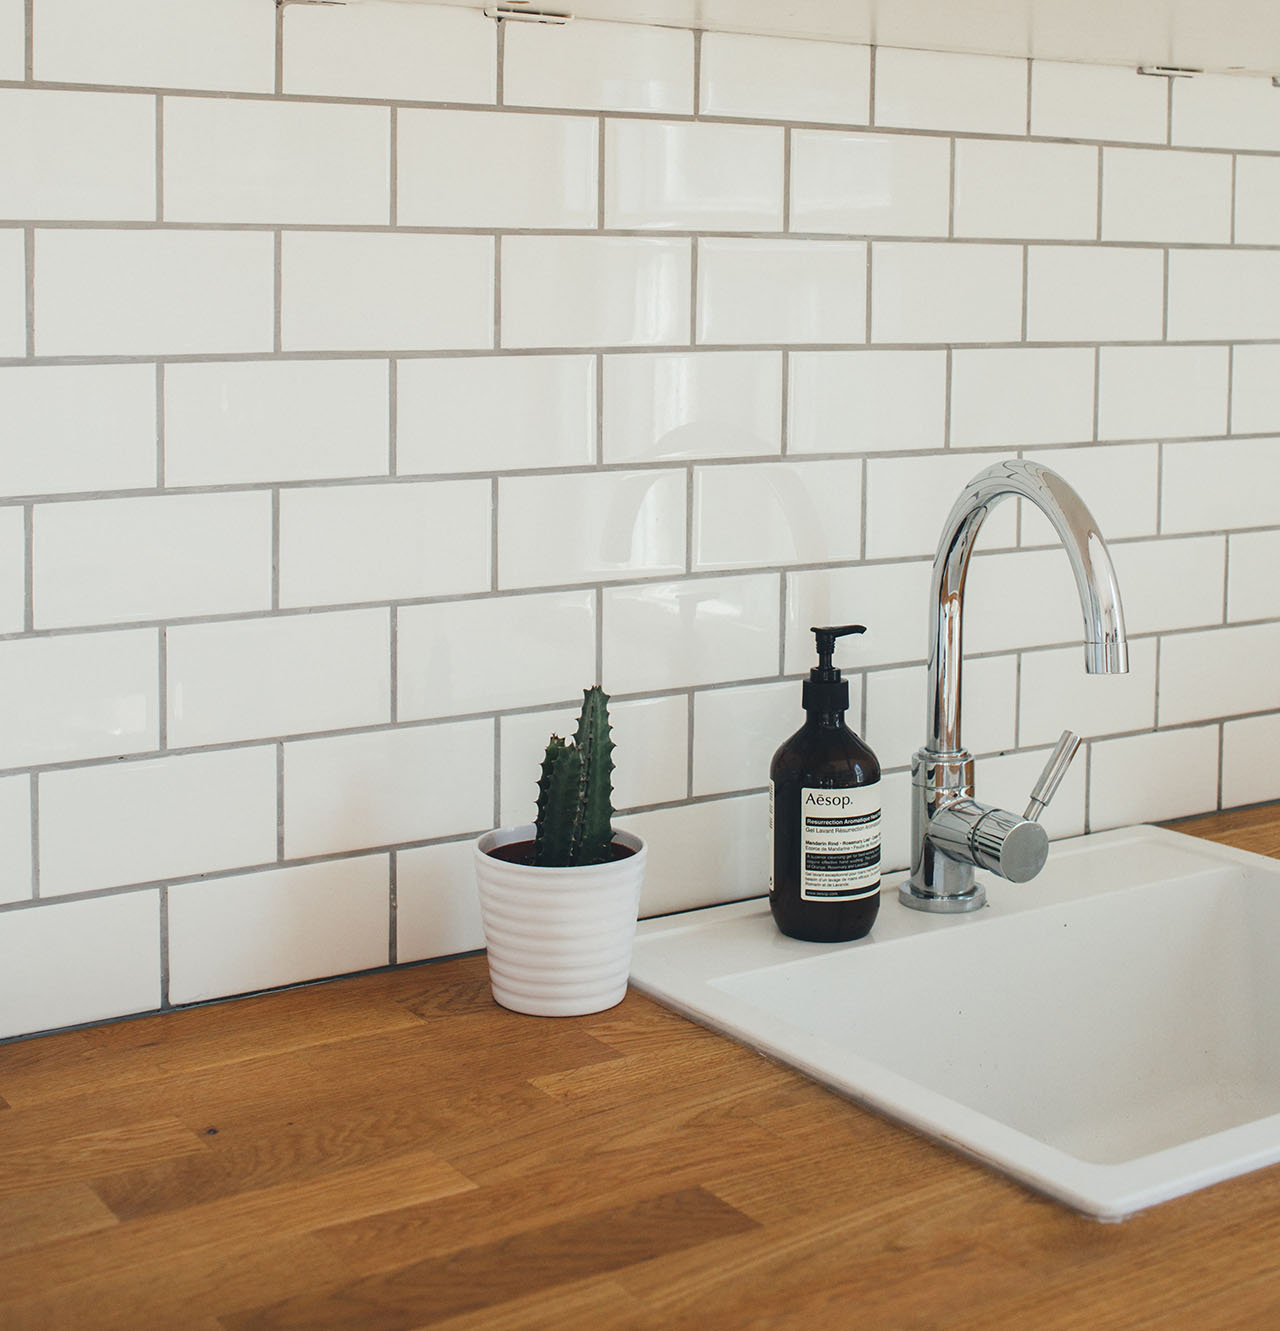 Image of faucet with wall tiles